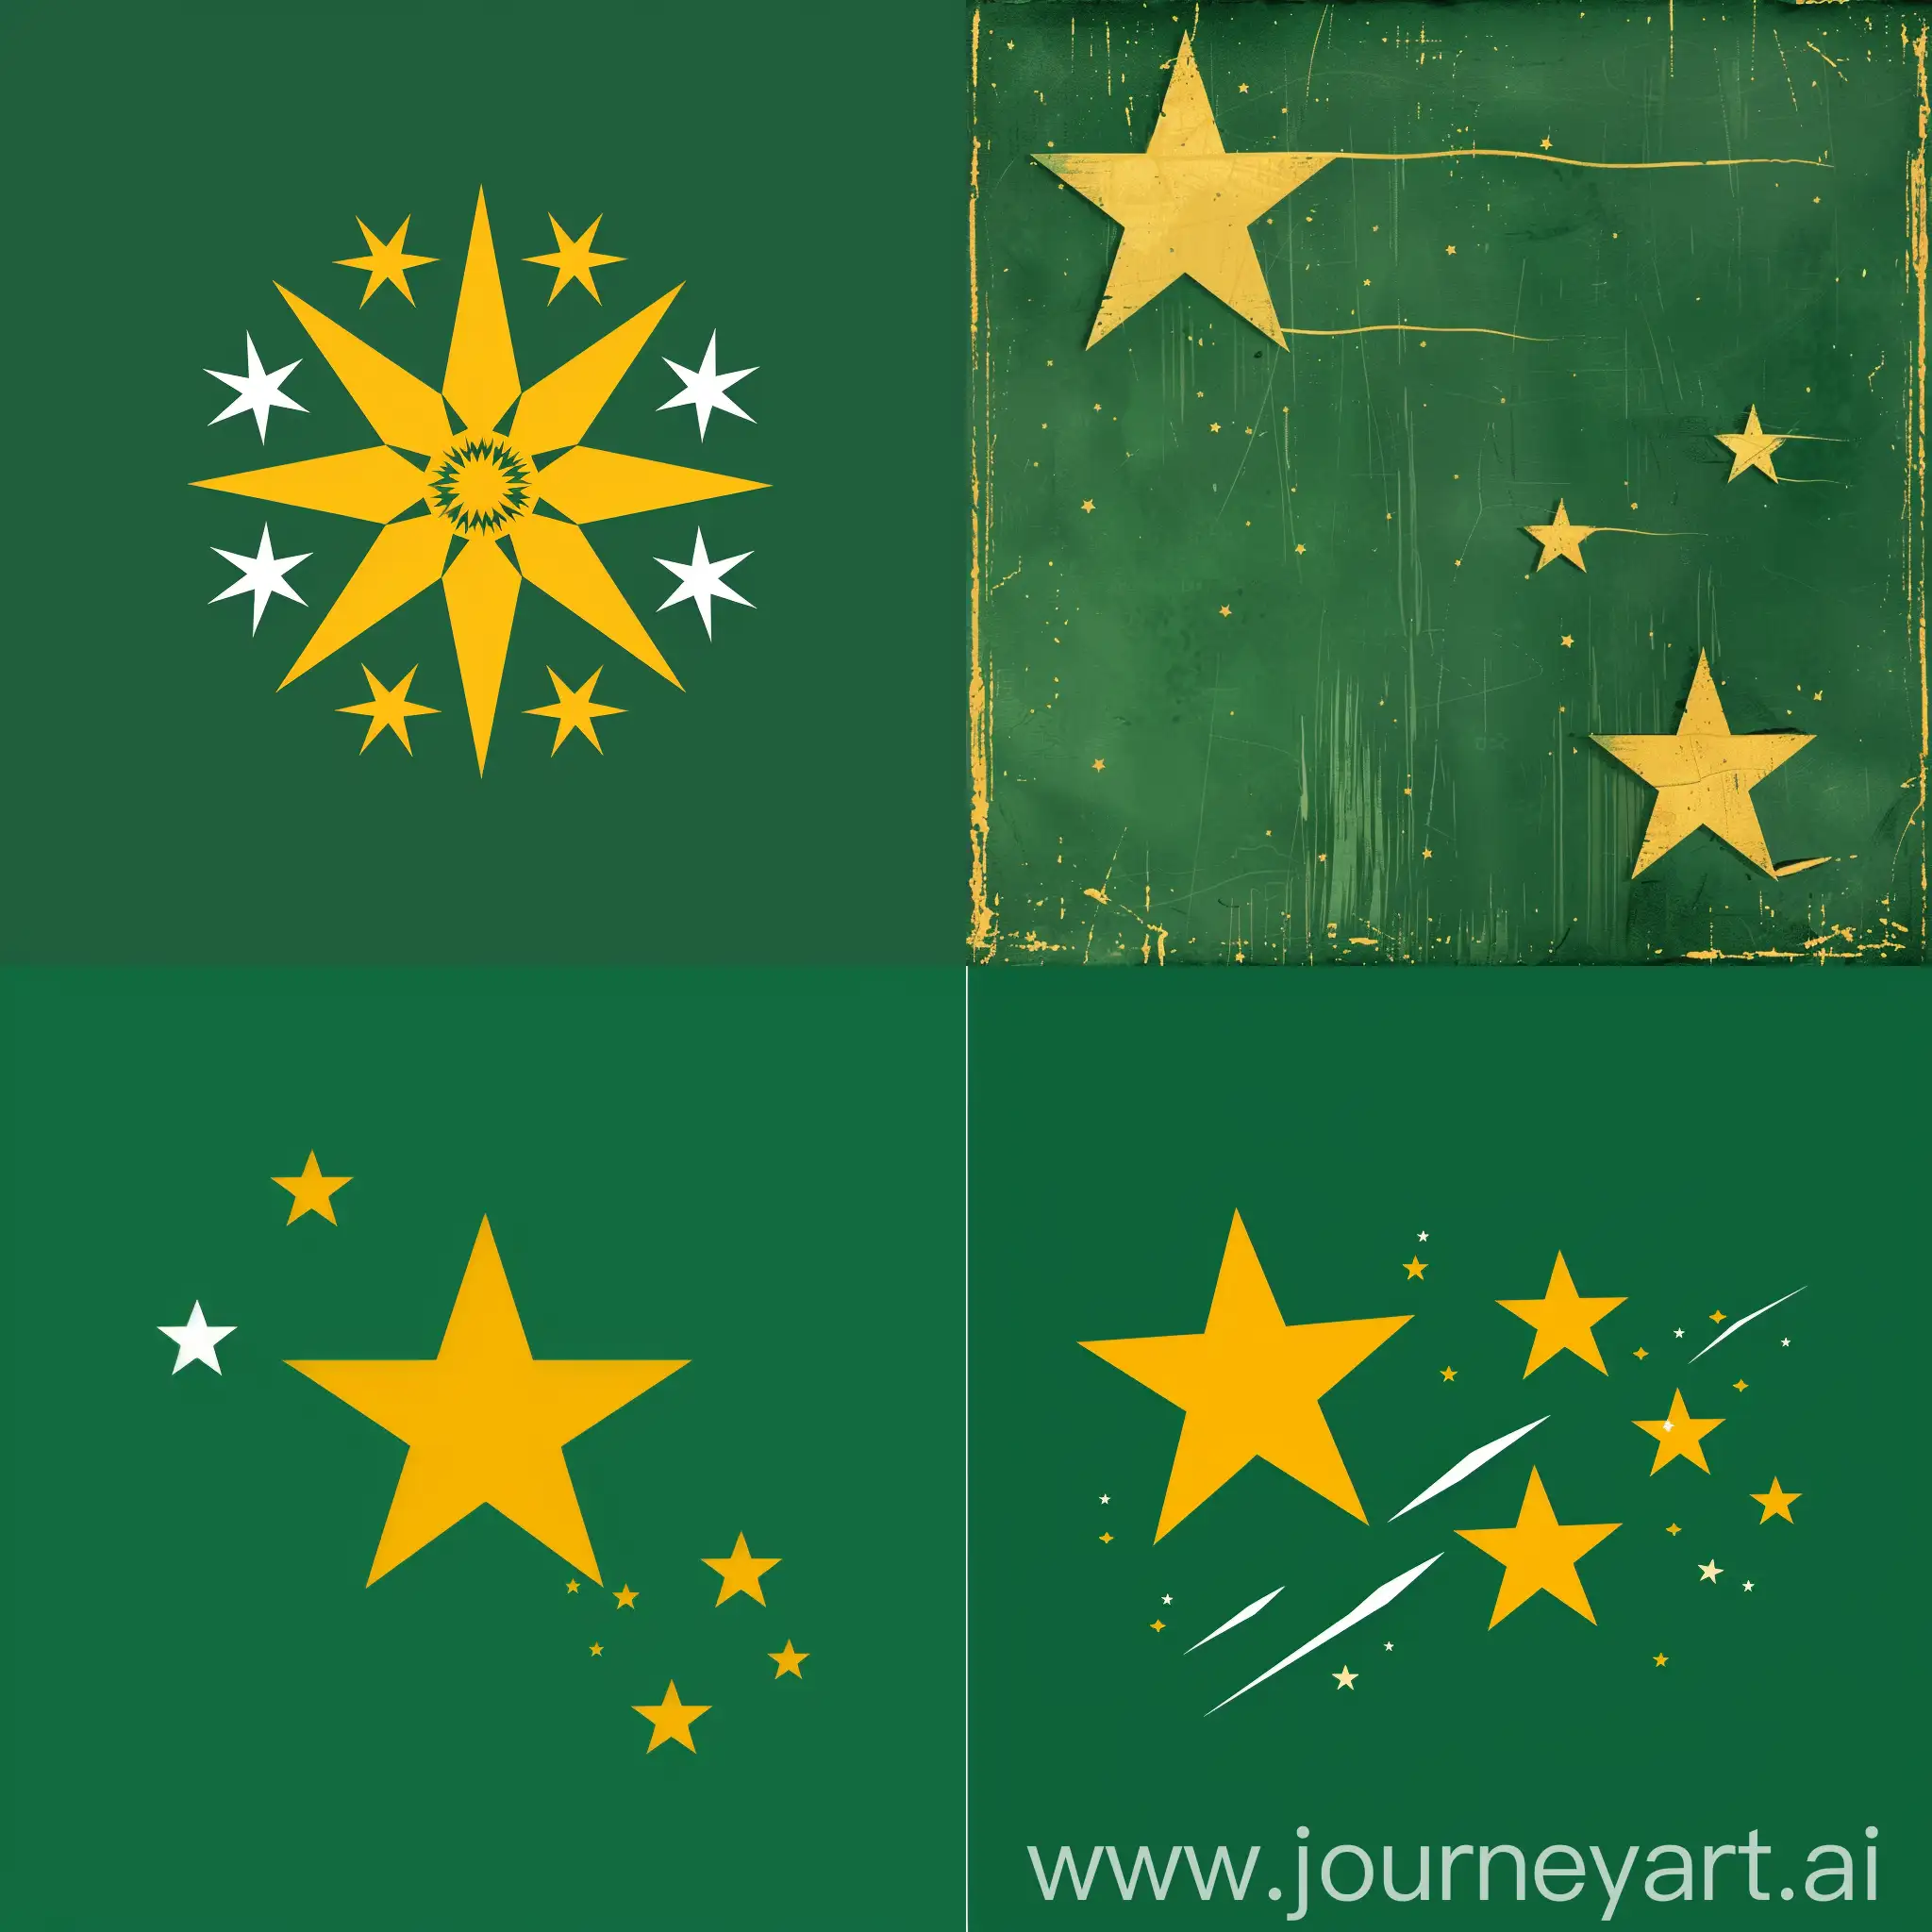 Green-Flag-with-Yellow-Stars-and-Radiating-White-Rays-on-Cloth-Background